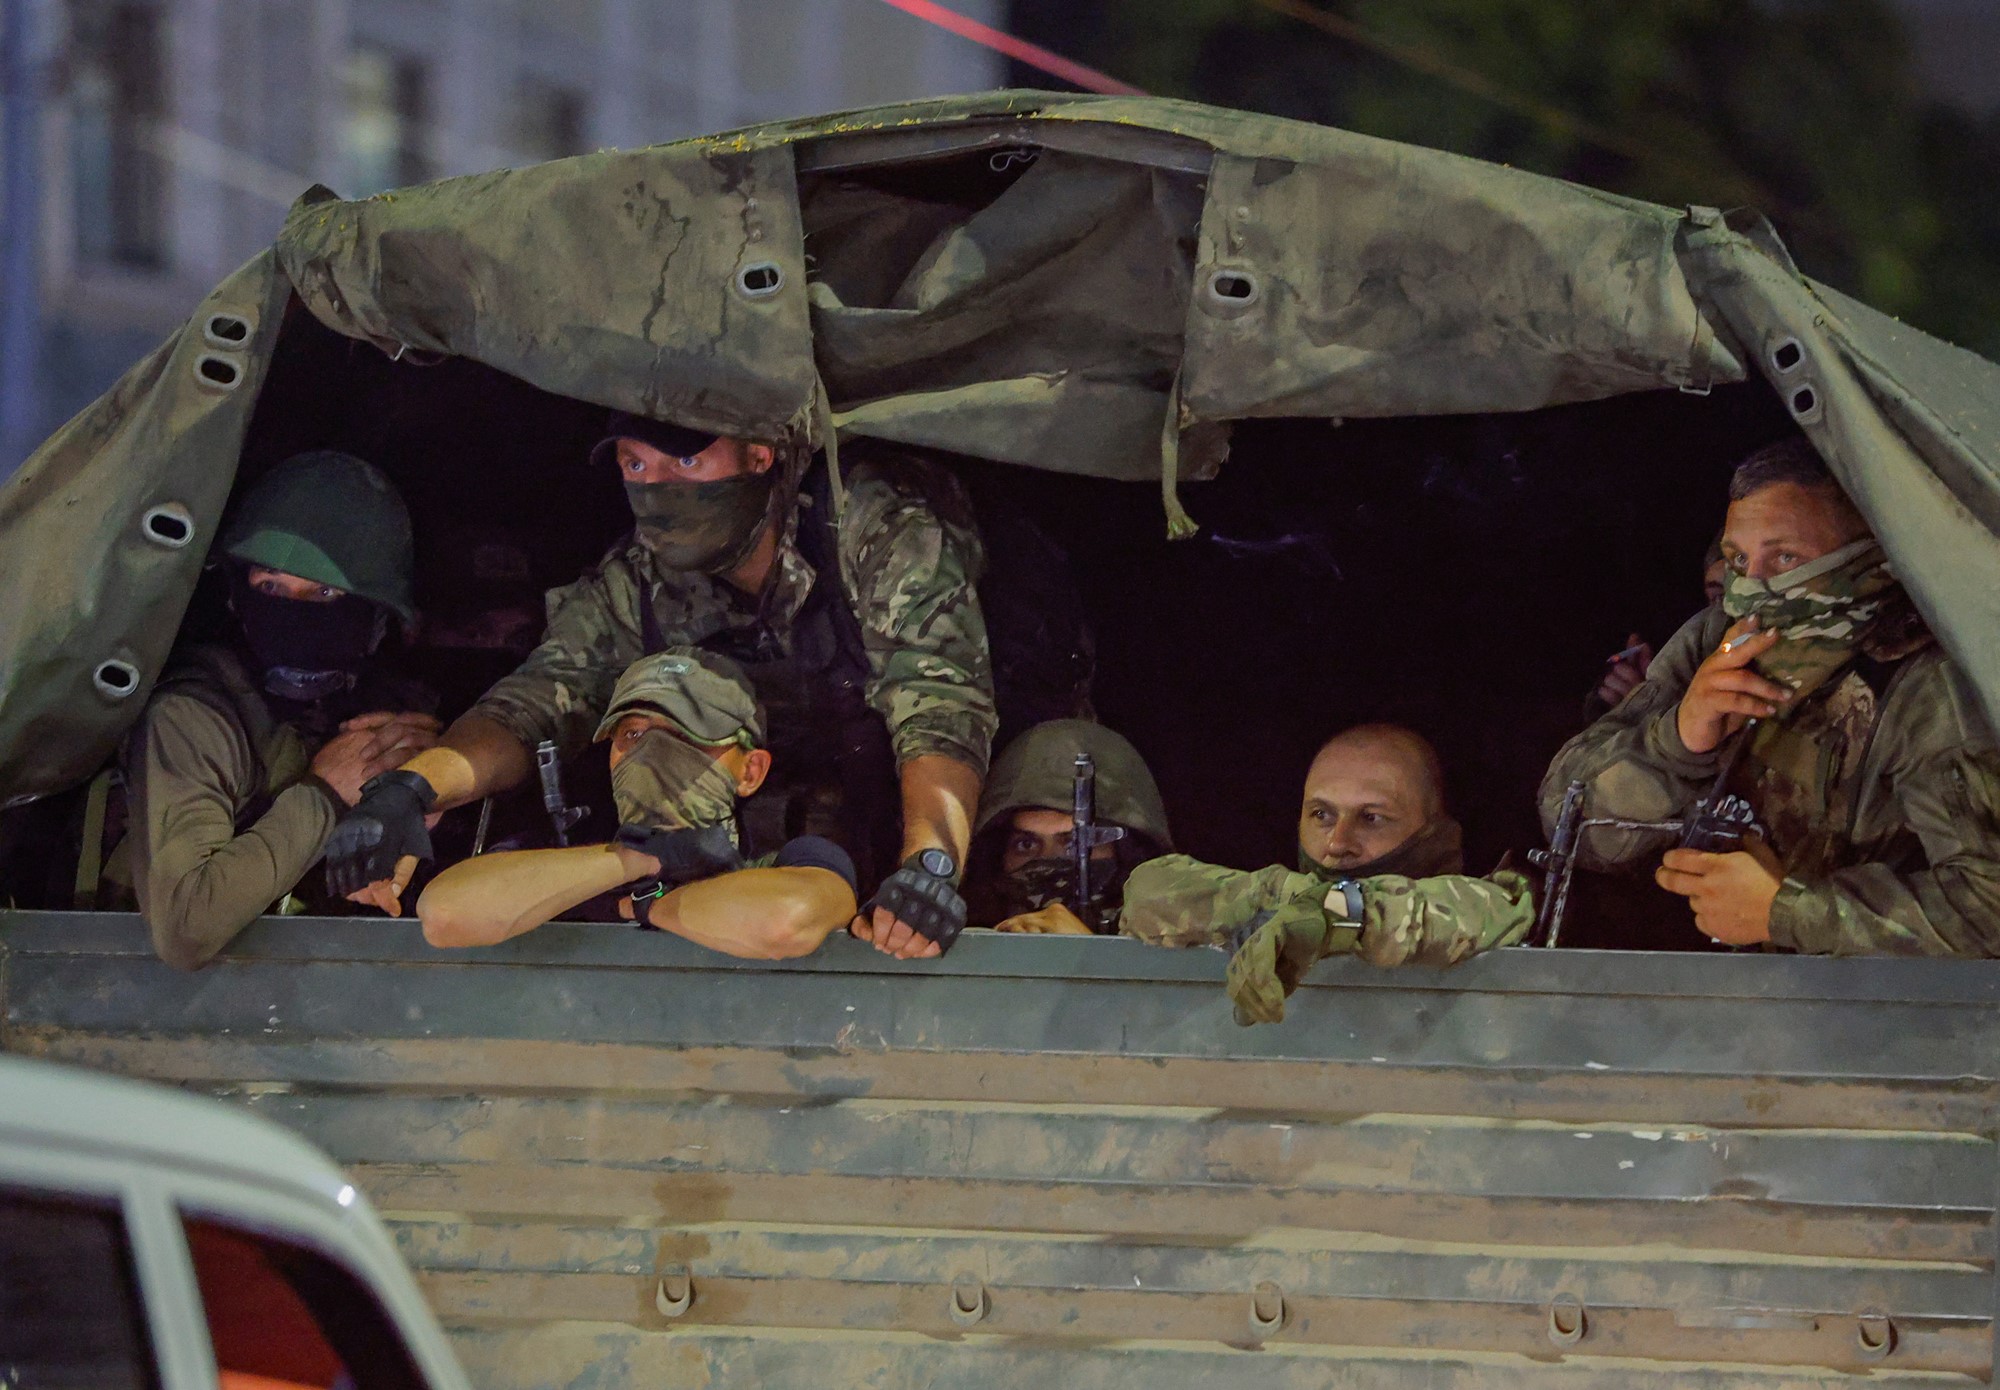 Six soldiers are pictured in the back of an army vehicle.